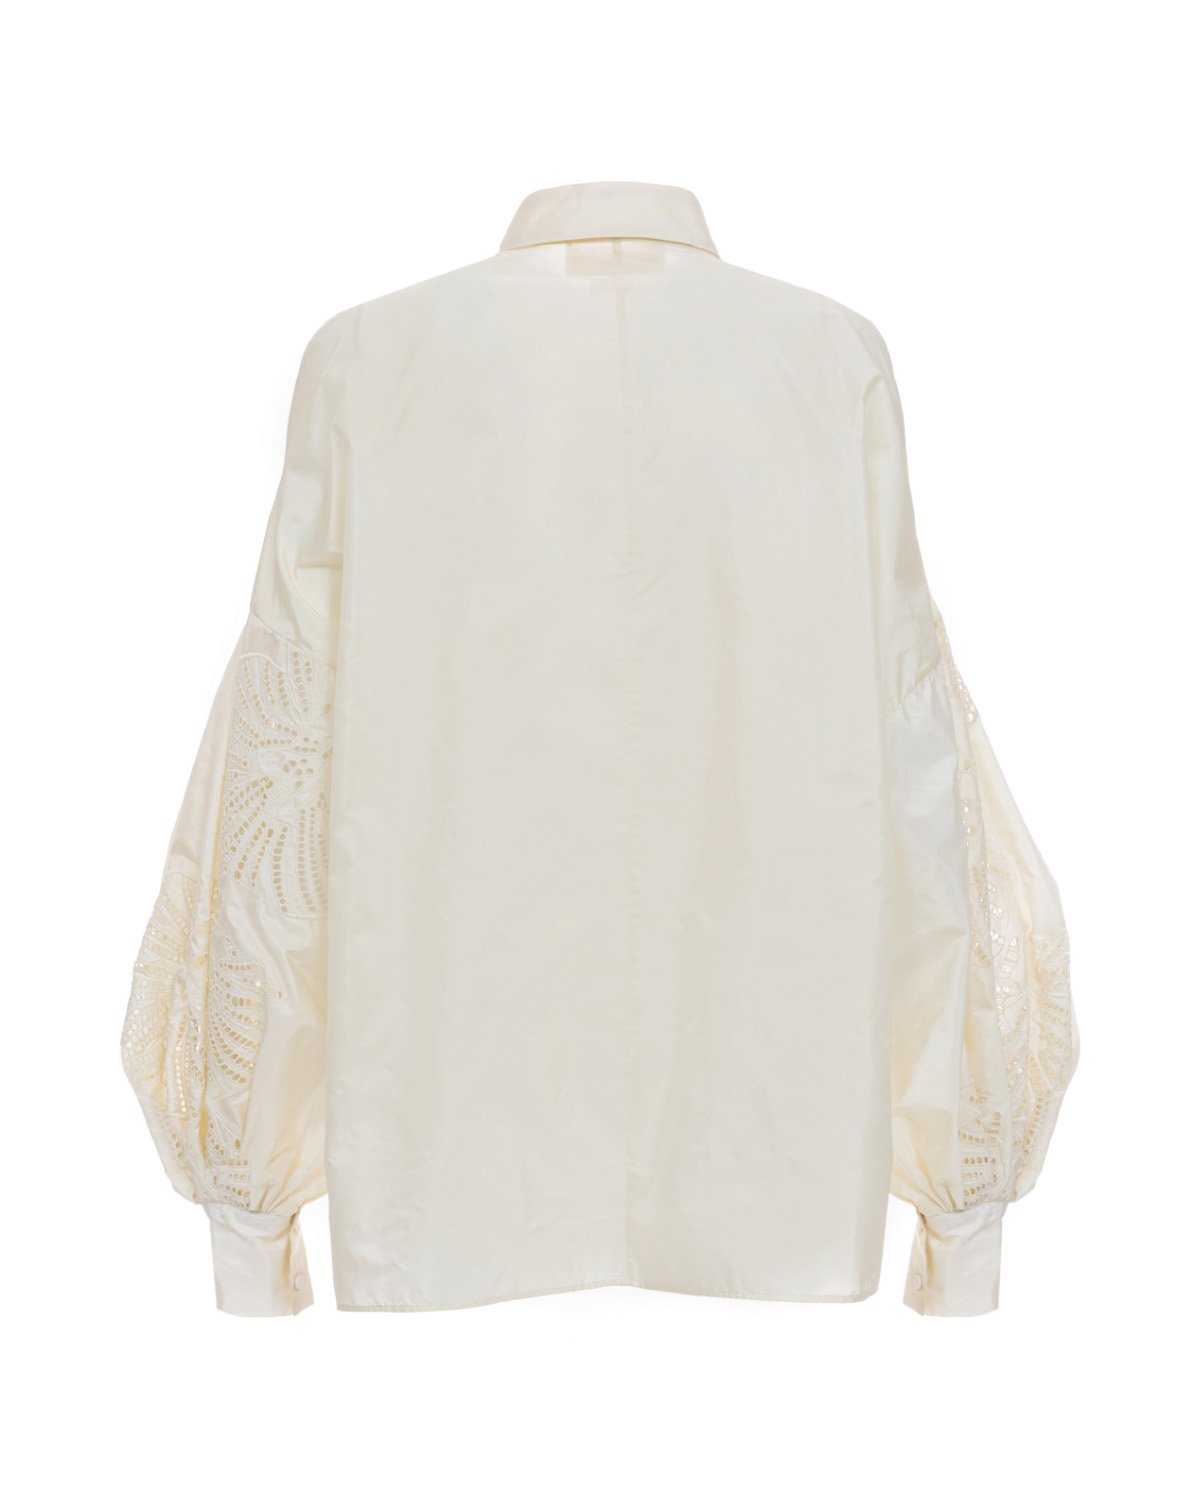 Taffeta blouse with embroidered sleeves. | Temporary Flash Sale | Genny